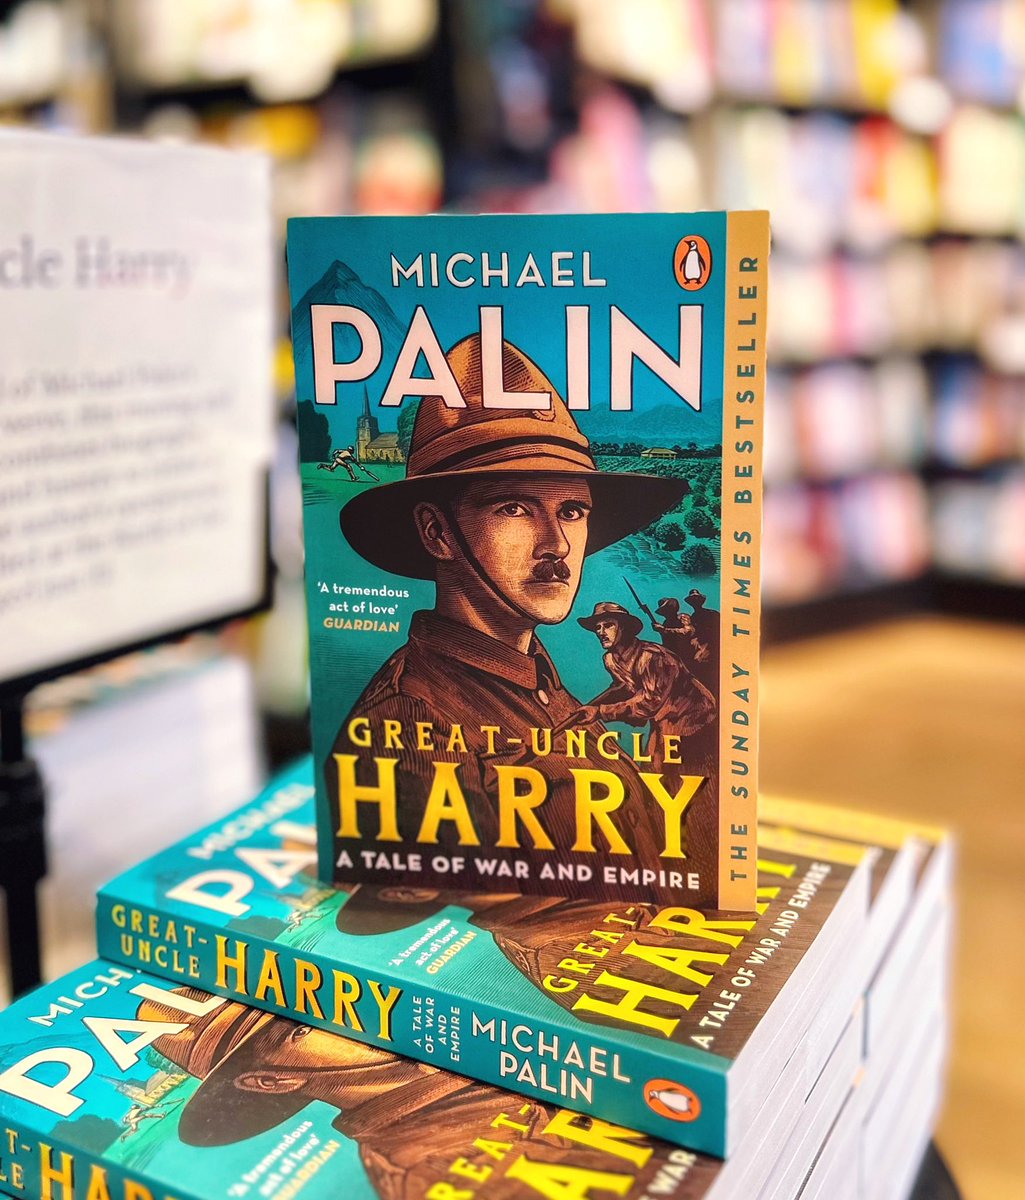 Michael Palin digs into the past to discover the story of his Grandfather’s brother who died in the First World War in this compelling mix of biography, travelogue and history.